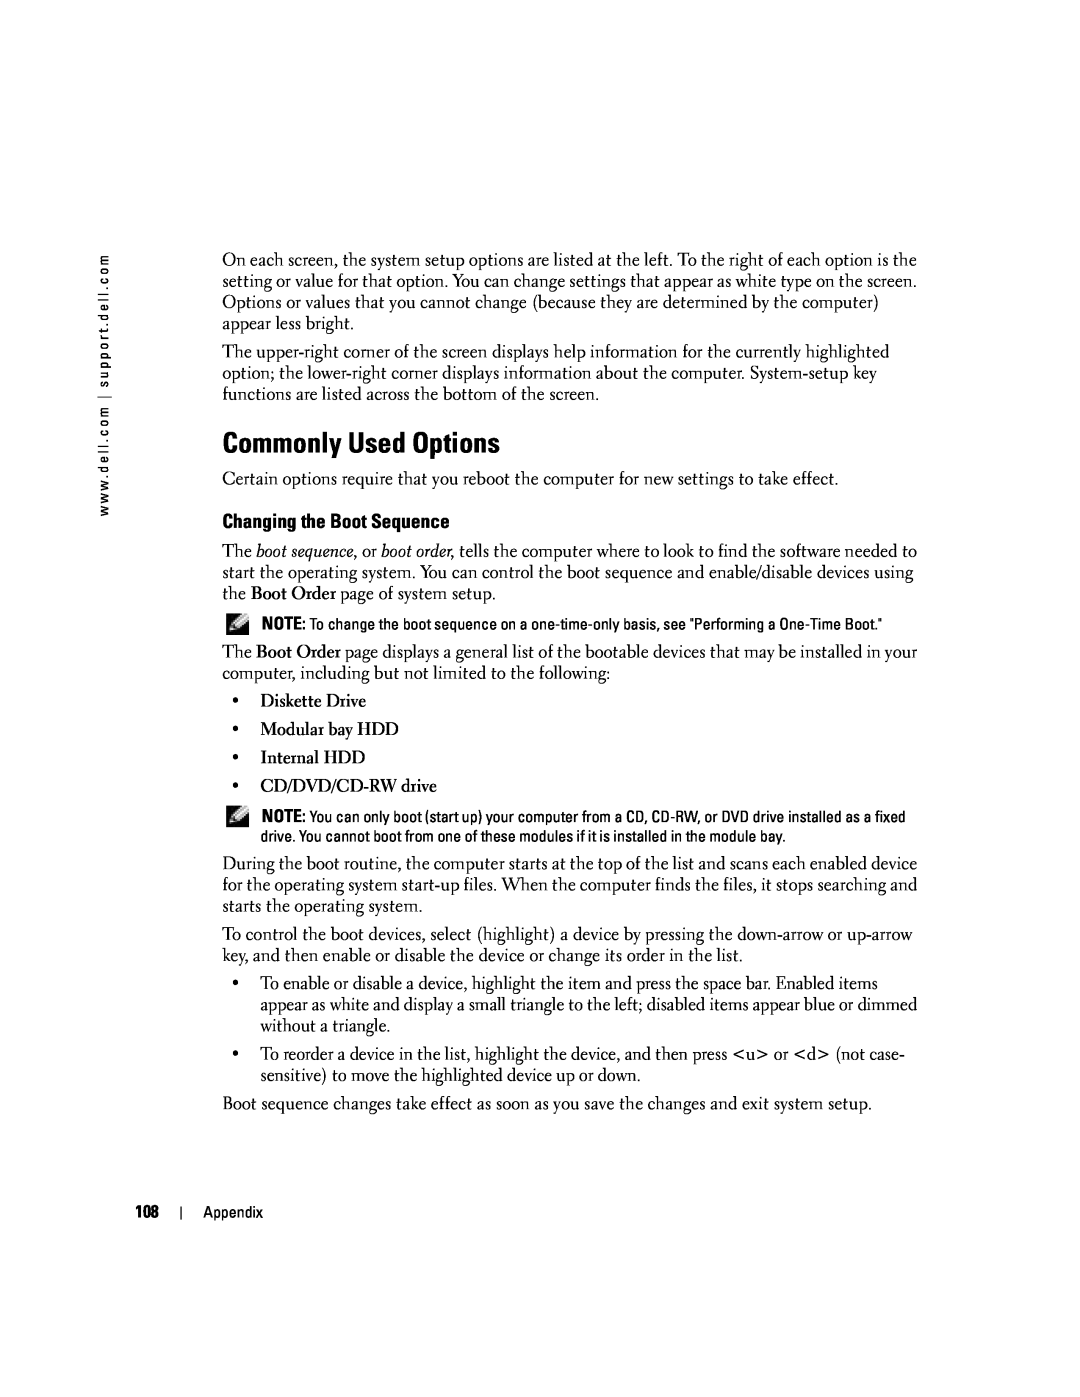 Dell PP10L owner manual Commonly Used Options, Changing the Boot Sequence 